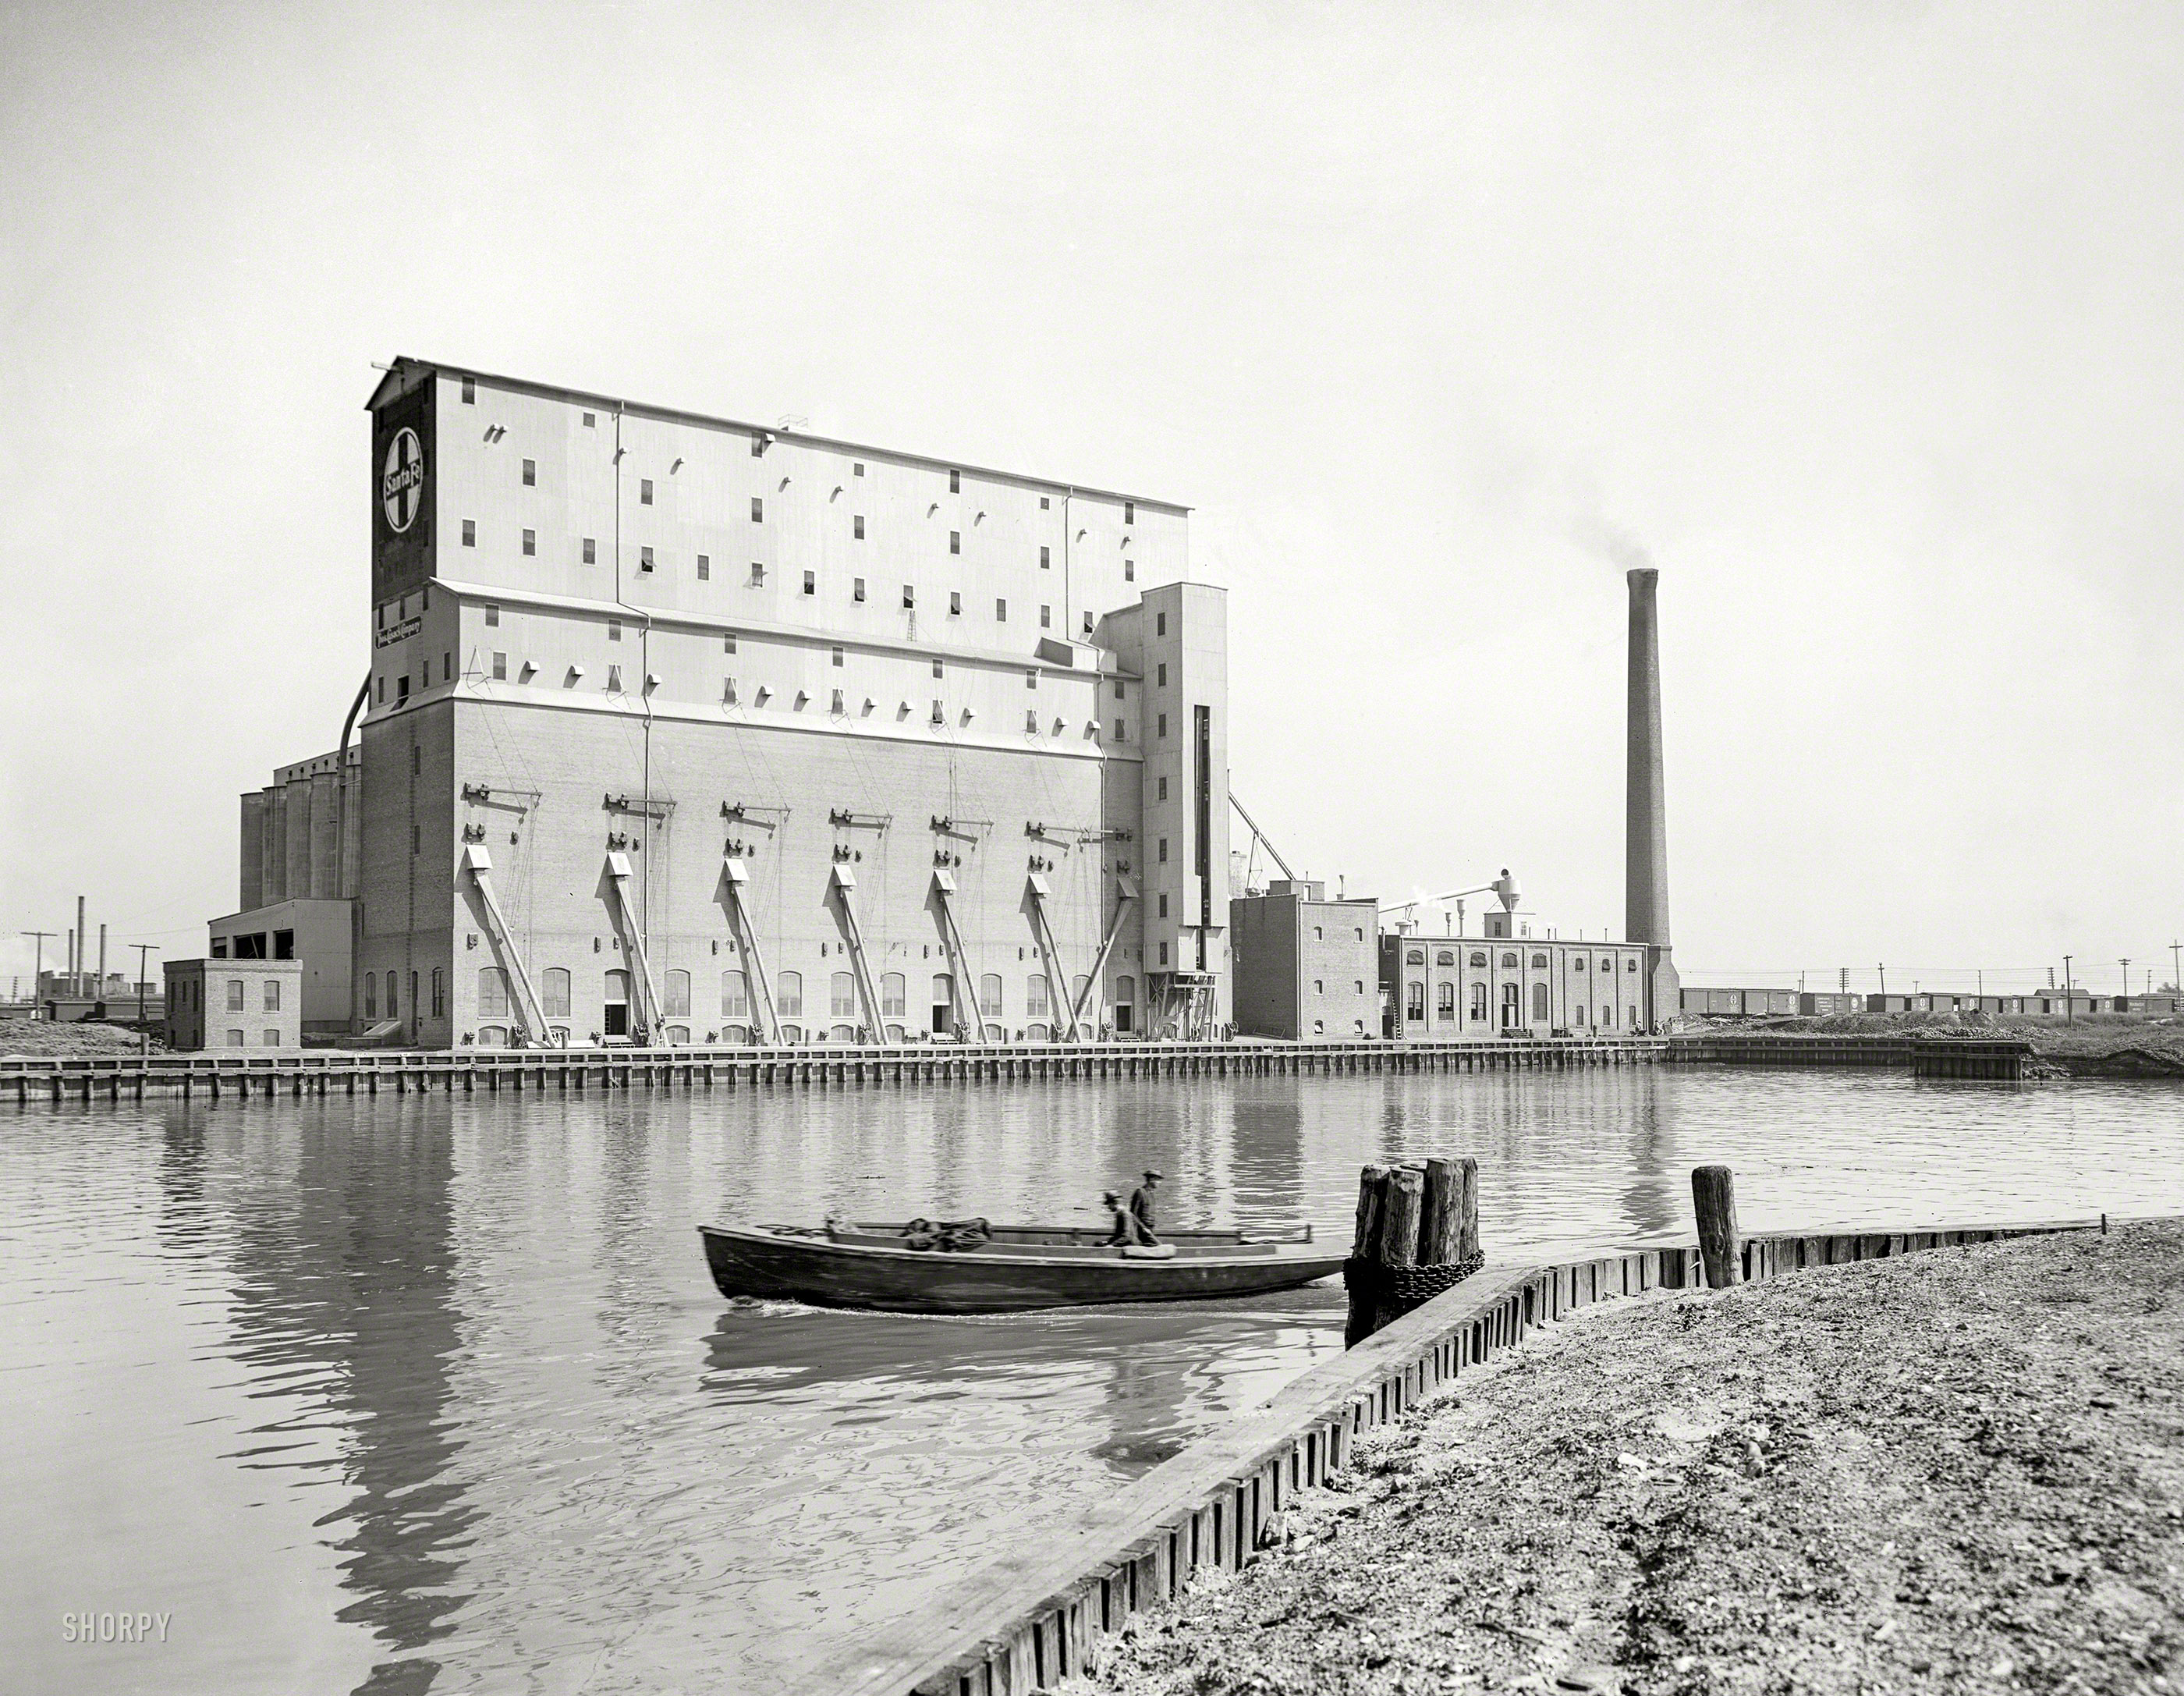 Chicago circa 1915."The Santa Fe grain elevator, head of the canal." Pantry for the nation's breadbasket. 8x10 inch dry plate glass negative. View full size.